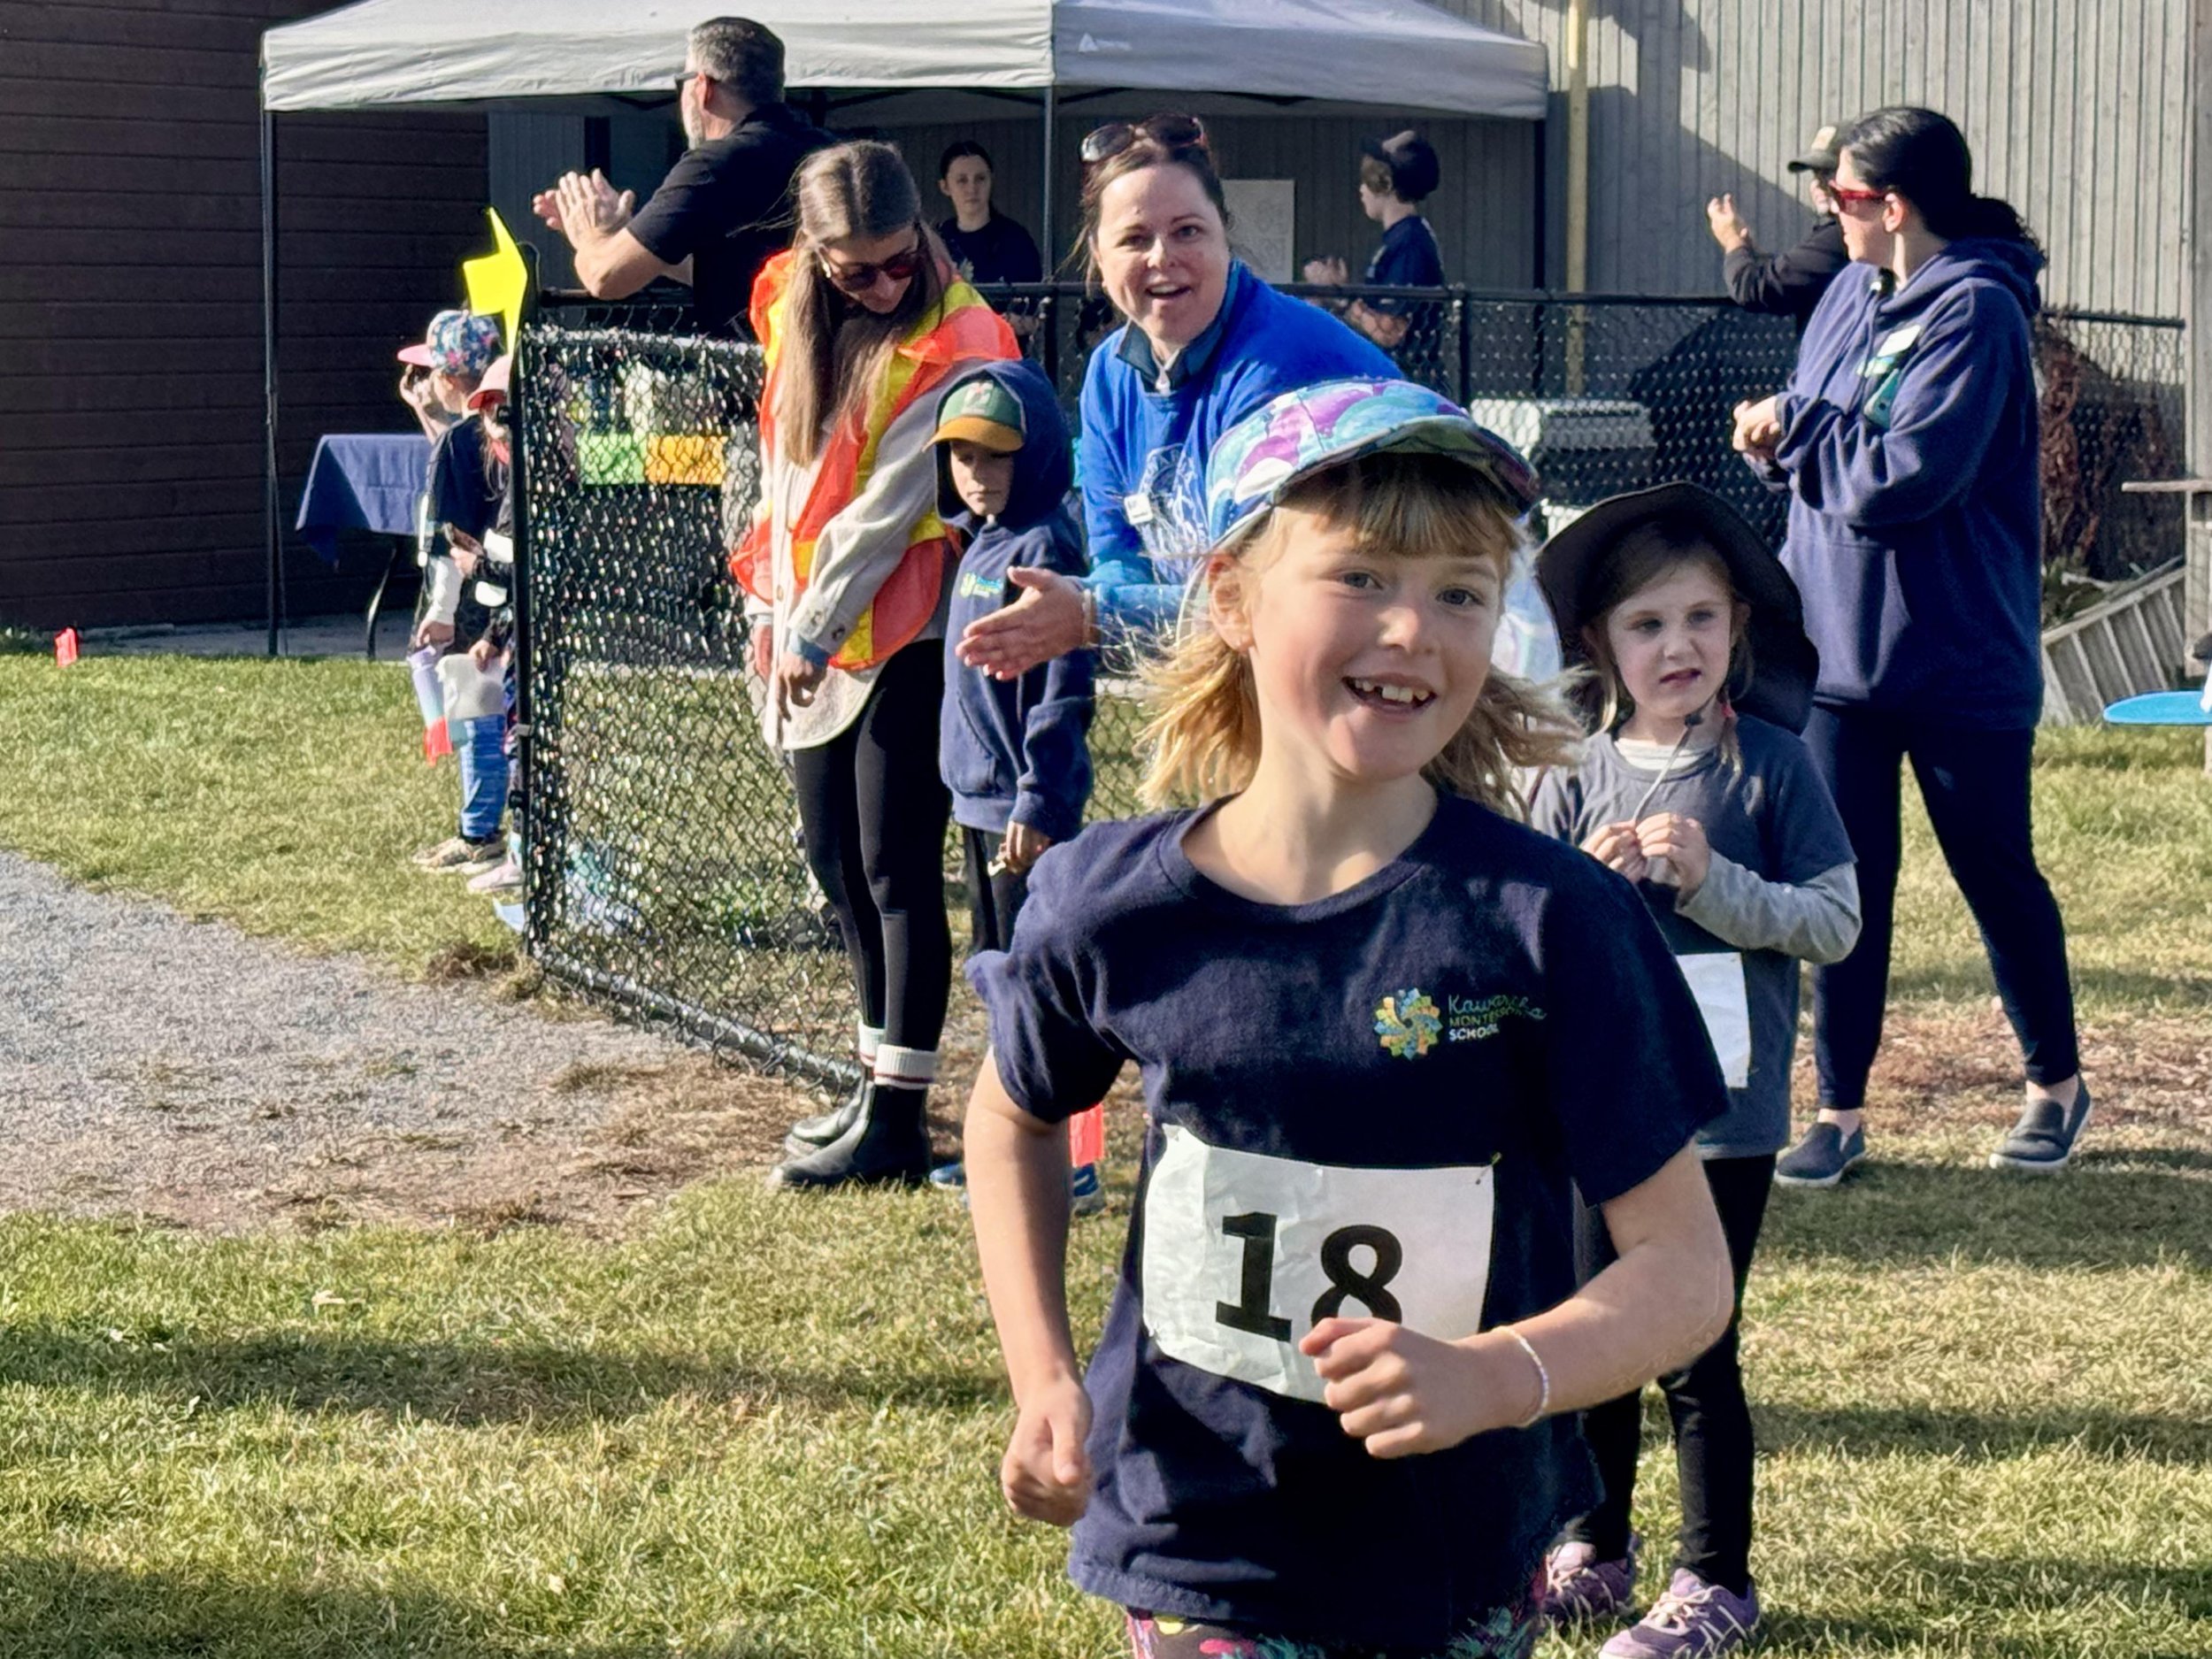  Grade 3 student Esther van Ostveen, 8, running in her heat as students, parents and faculty cheered the racers all day. All photos by David Tuan Bui.